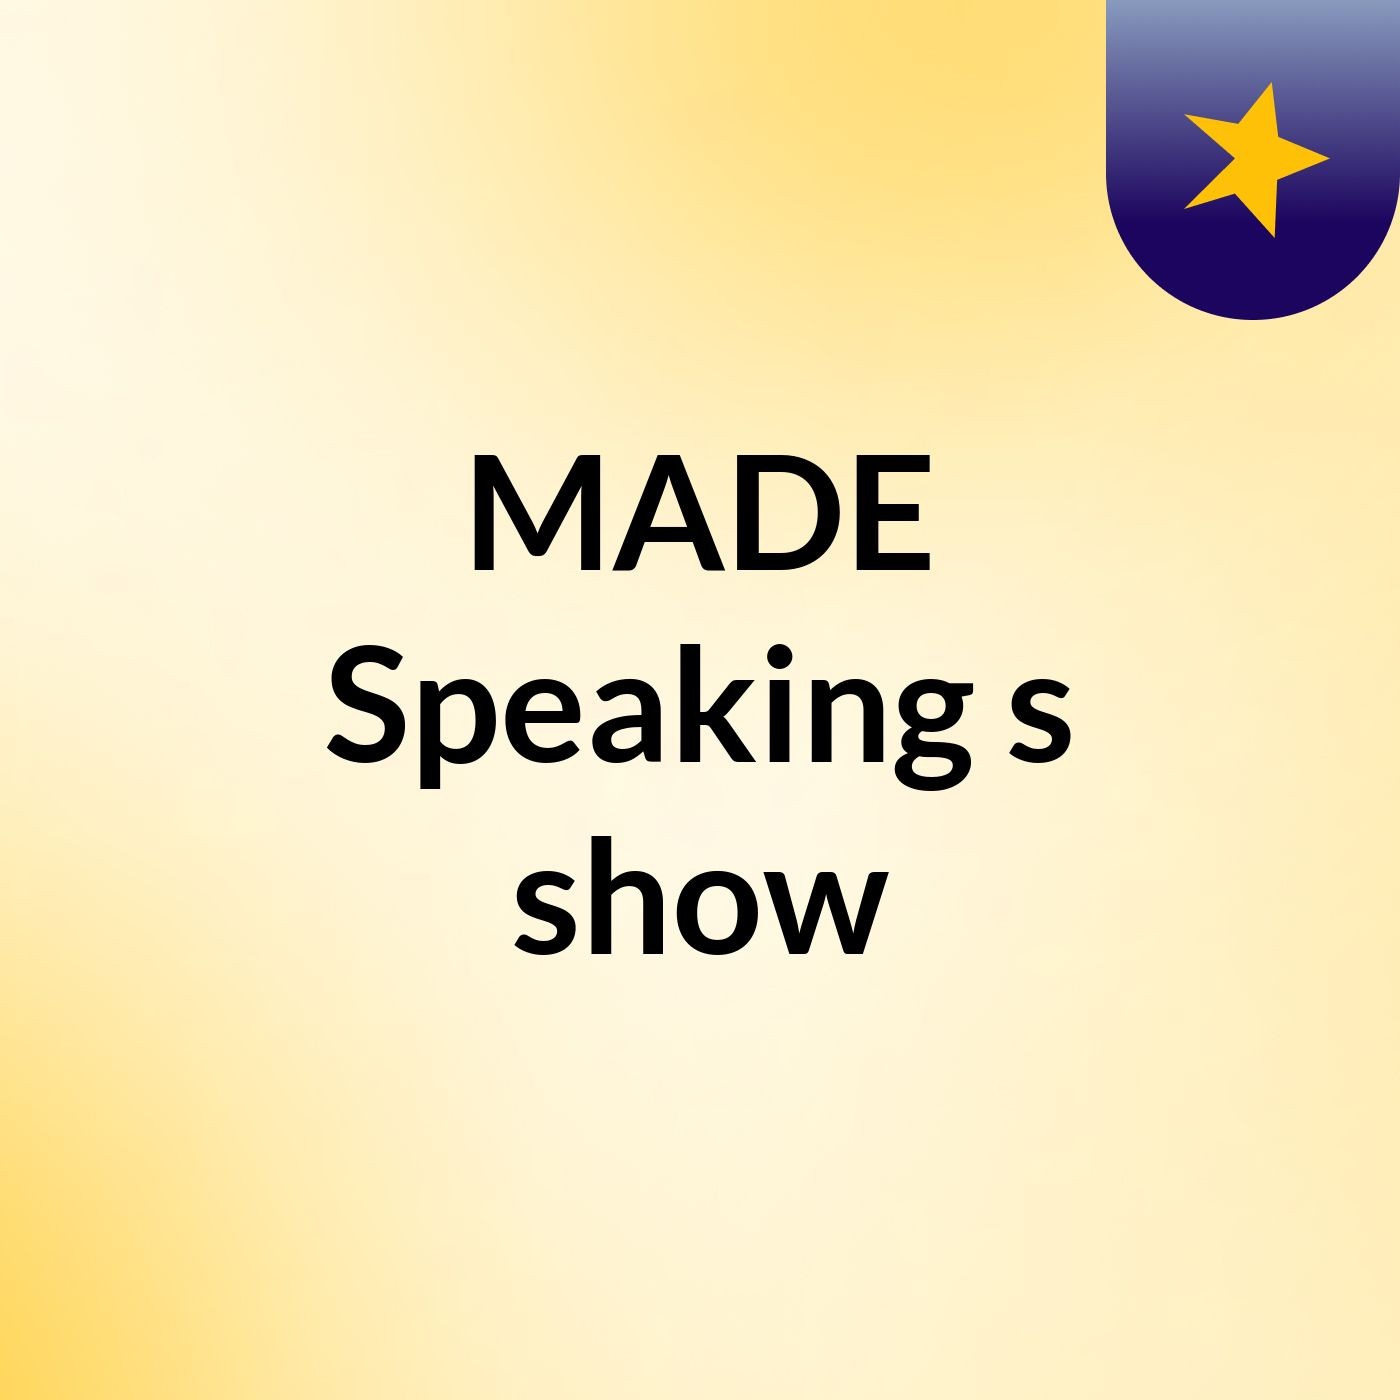 MADE Speaking's show